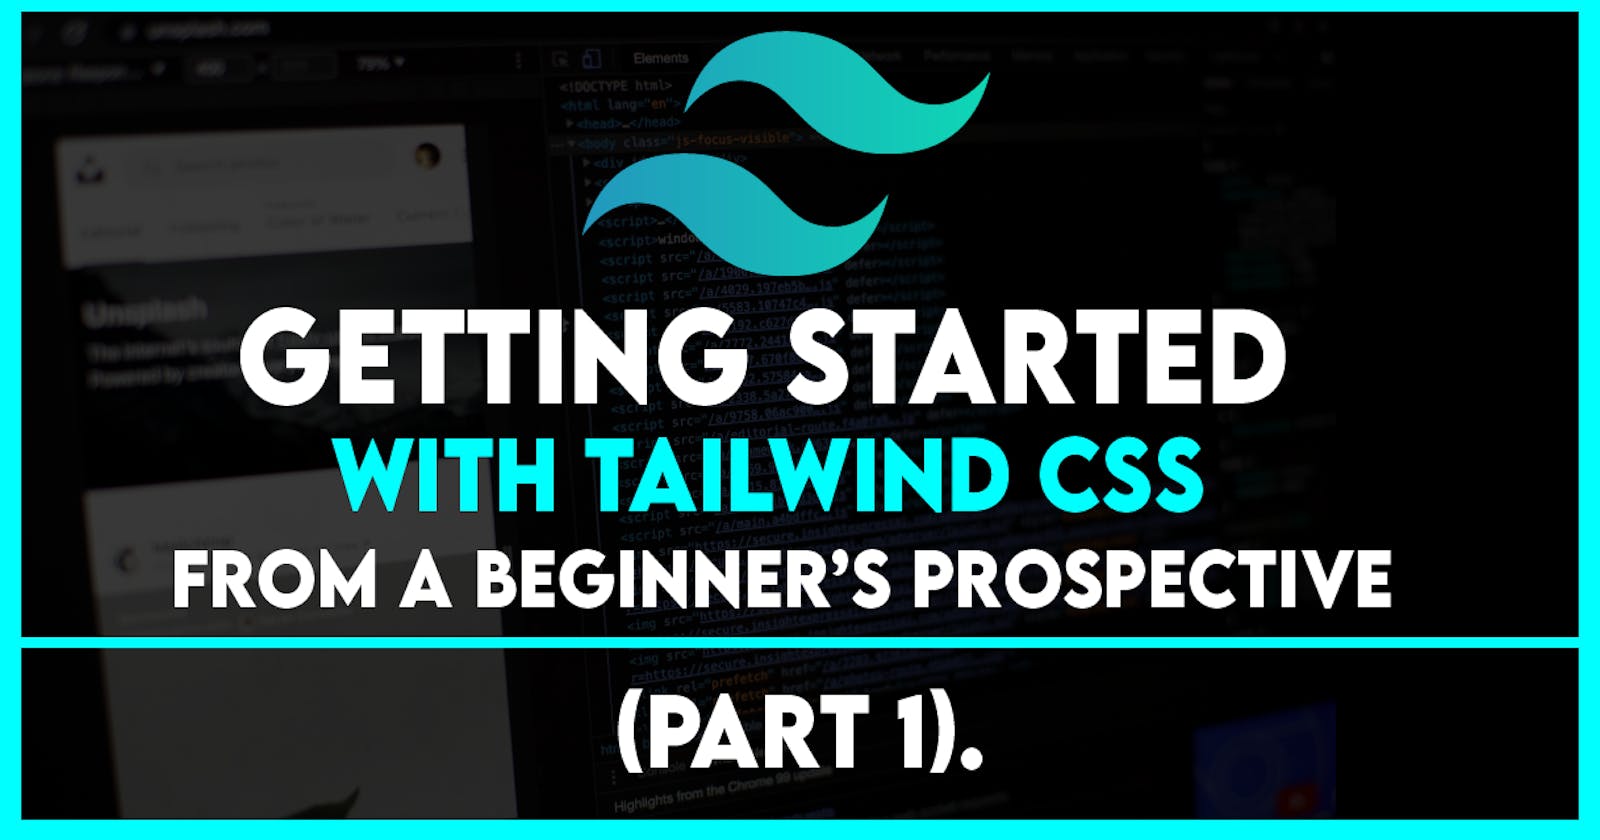 Getting Started With Tailwind Css From A Beginner’s Prospective (part 1).